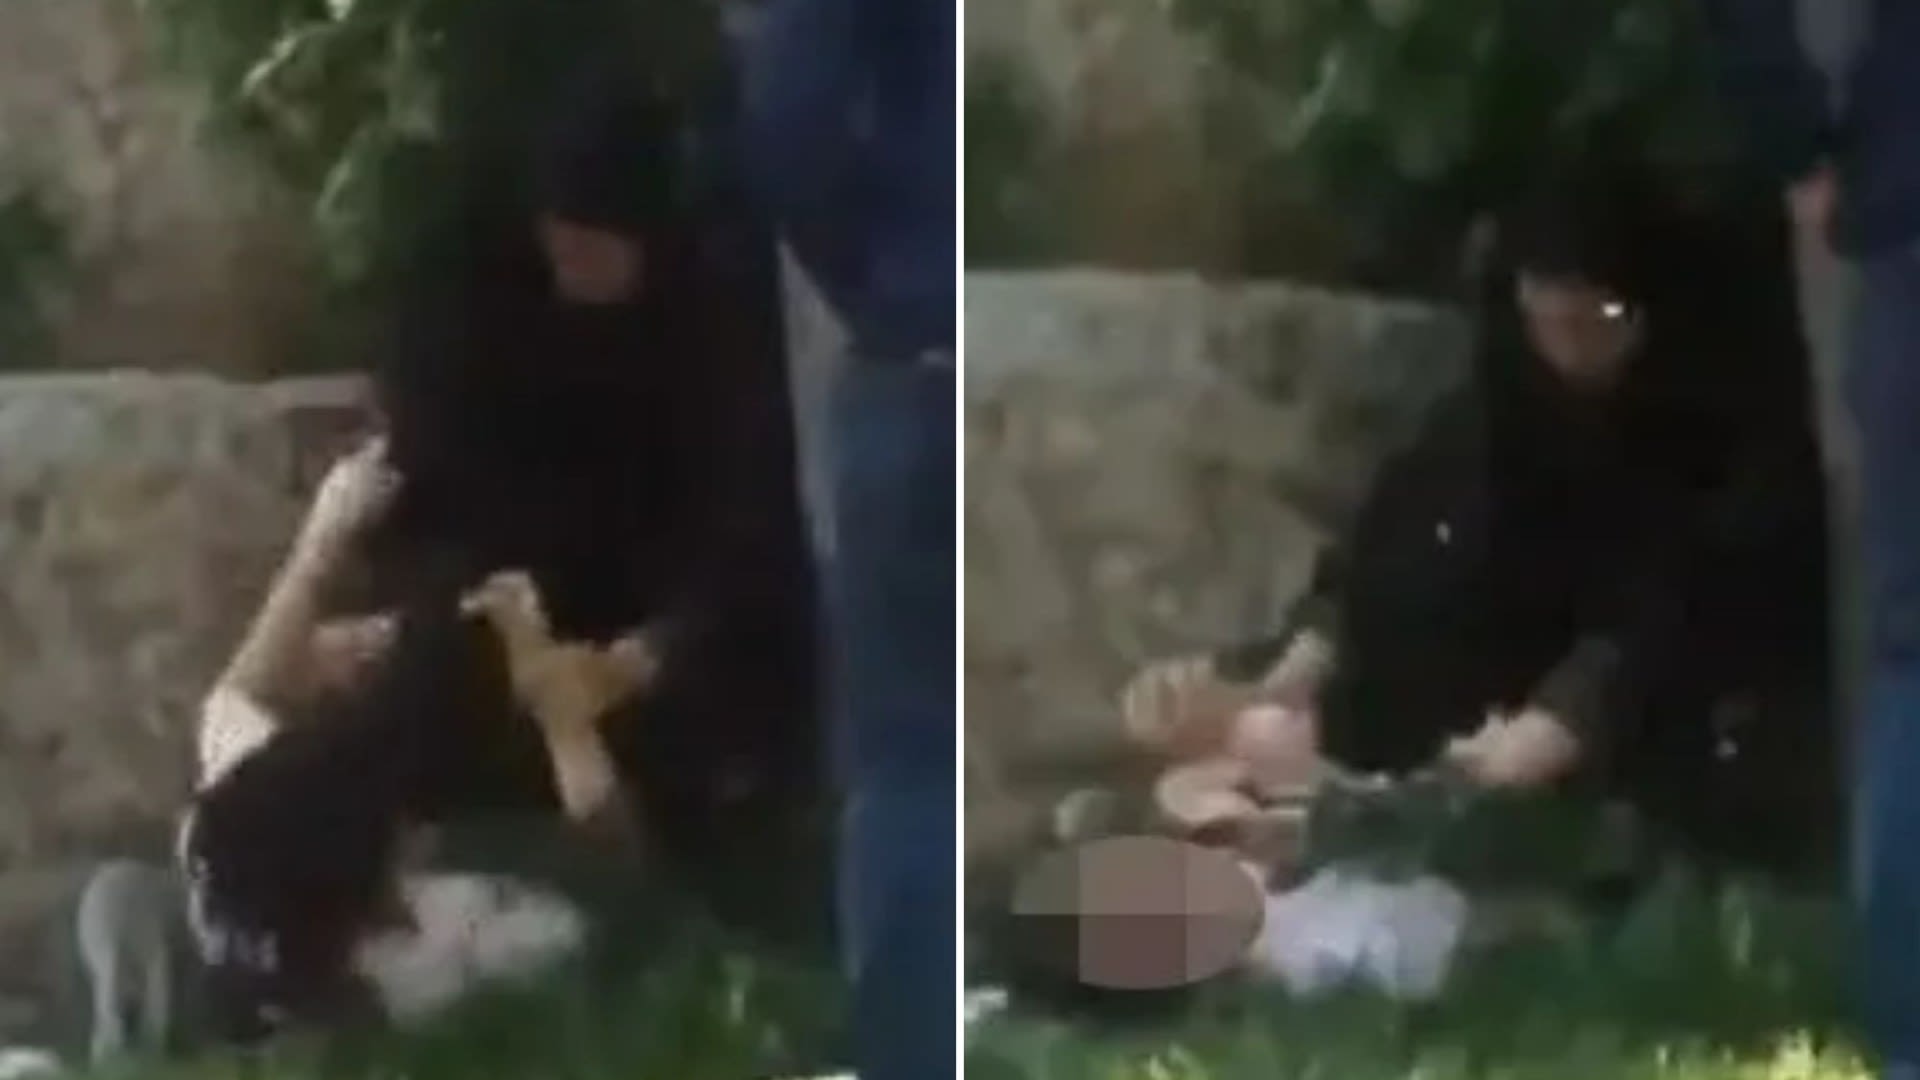 Moment Iran’s ‘morality police’ tackle woman for ‘refusing to cover her hair’